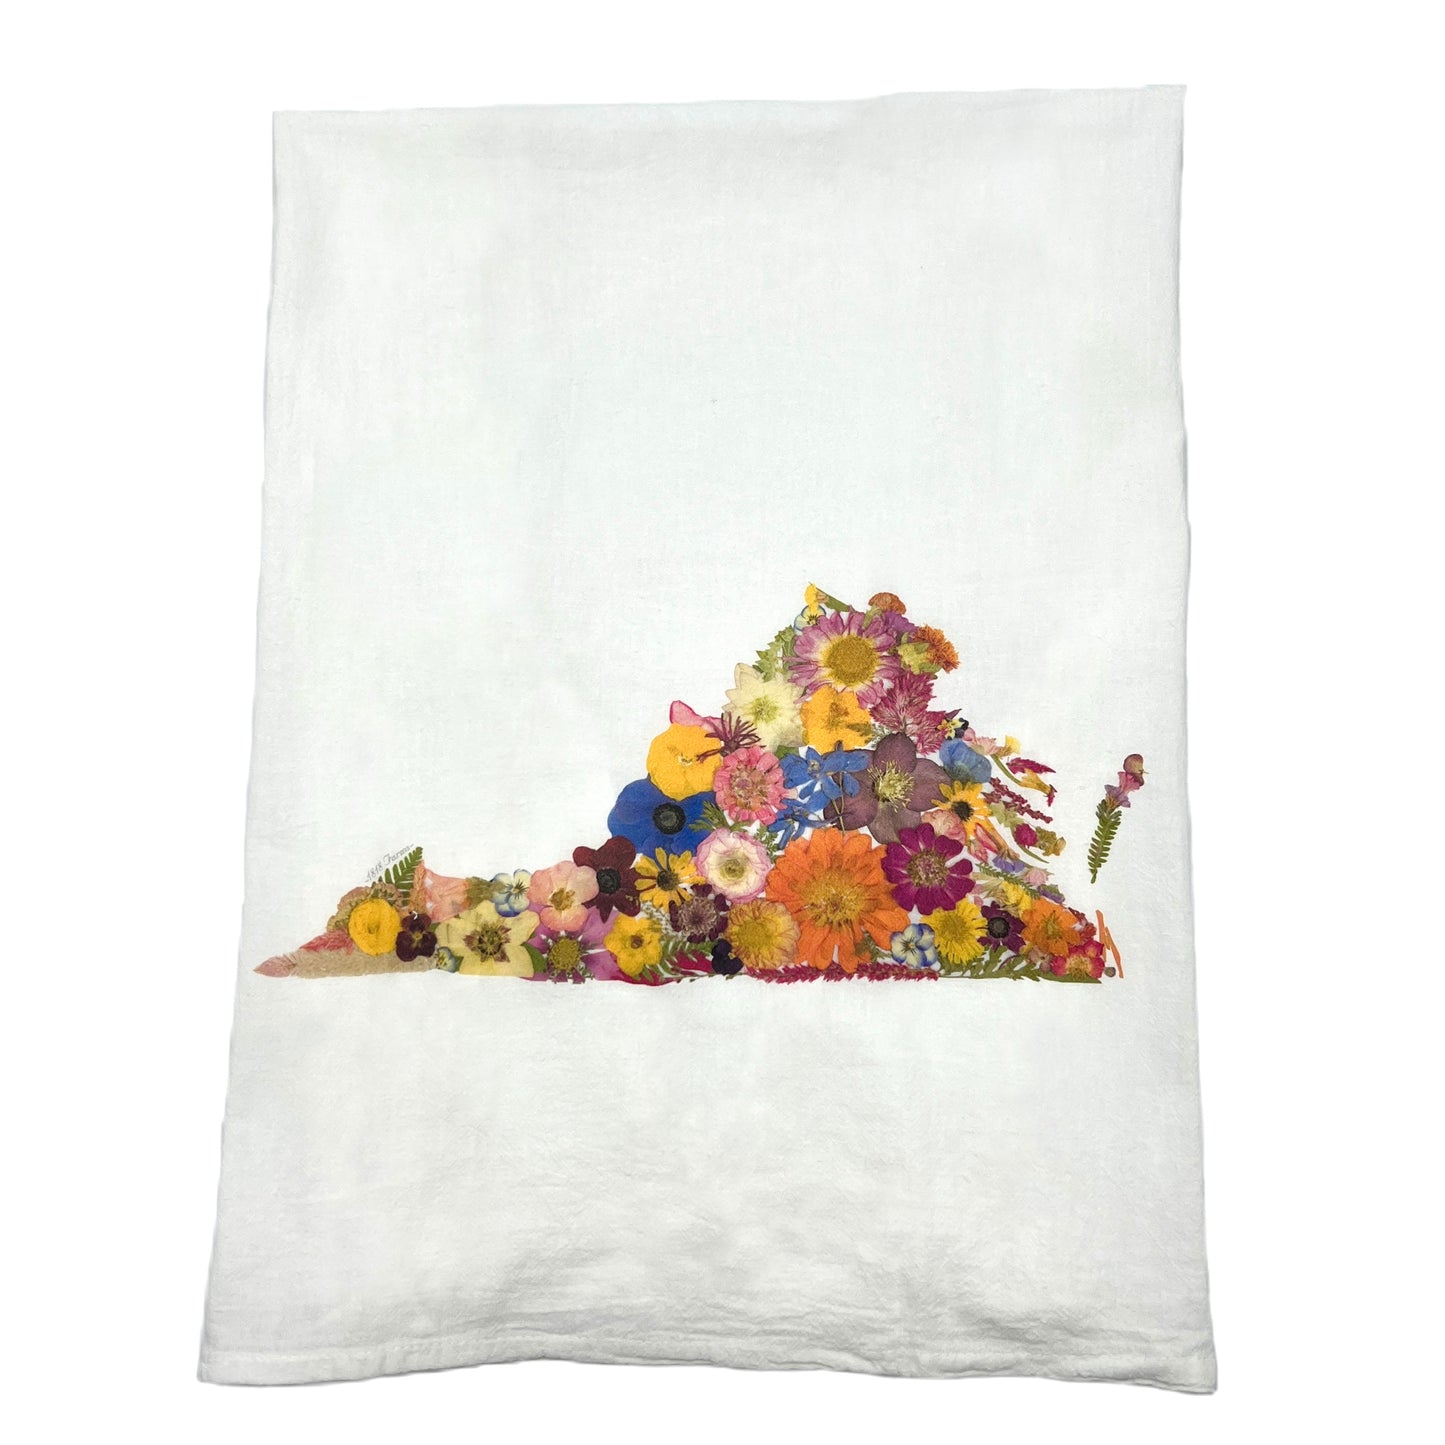 State Themed Flour Sack Towel Featuring Dried, Pressed Flowers - "Where I Bloom" Collection